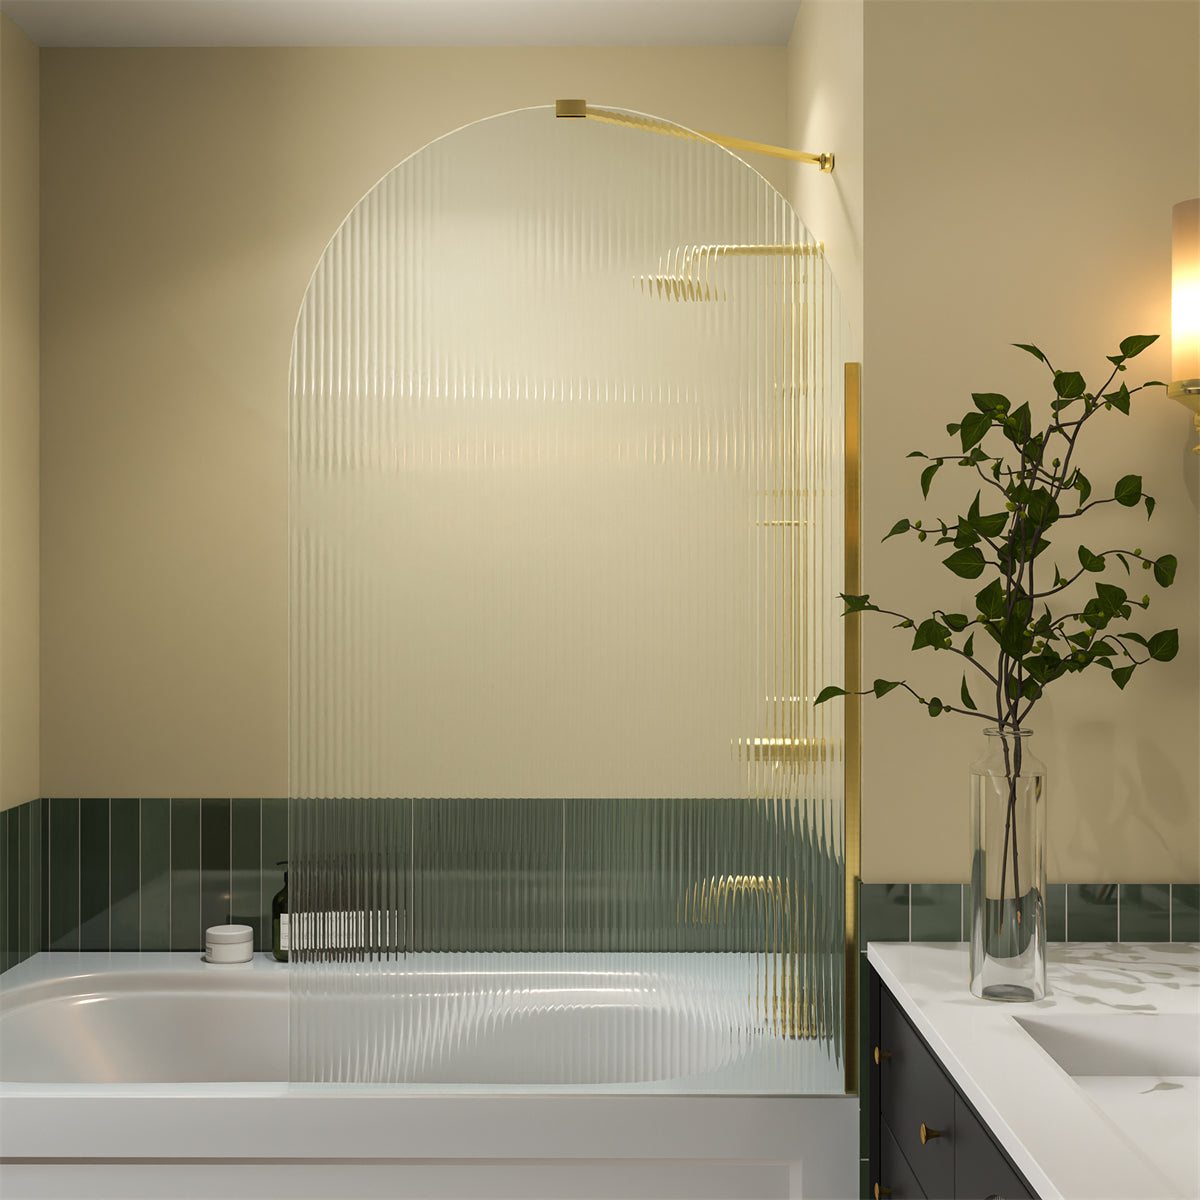 Serenity 33 X 58 Bathtub Screen Reeded Glass Shower Panel For Bathtub,Brushed Gold Finish,Reversible Installation,Semicircle